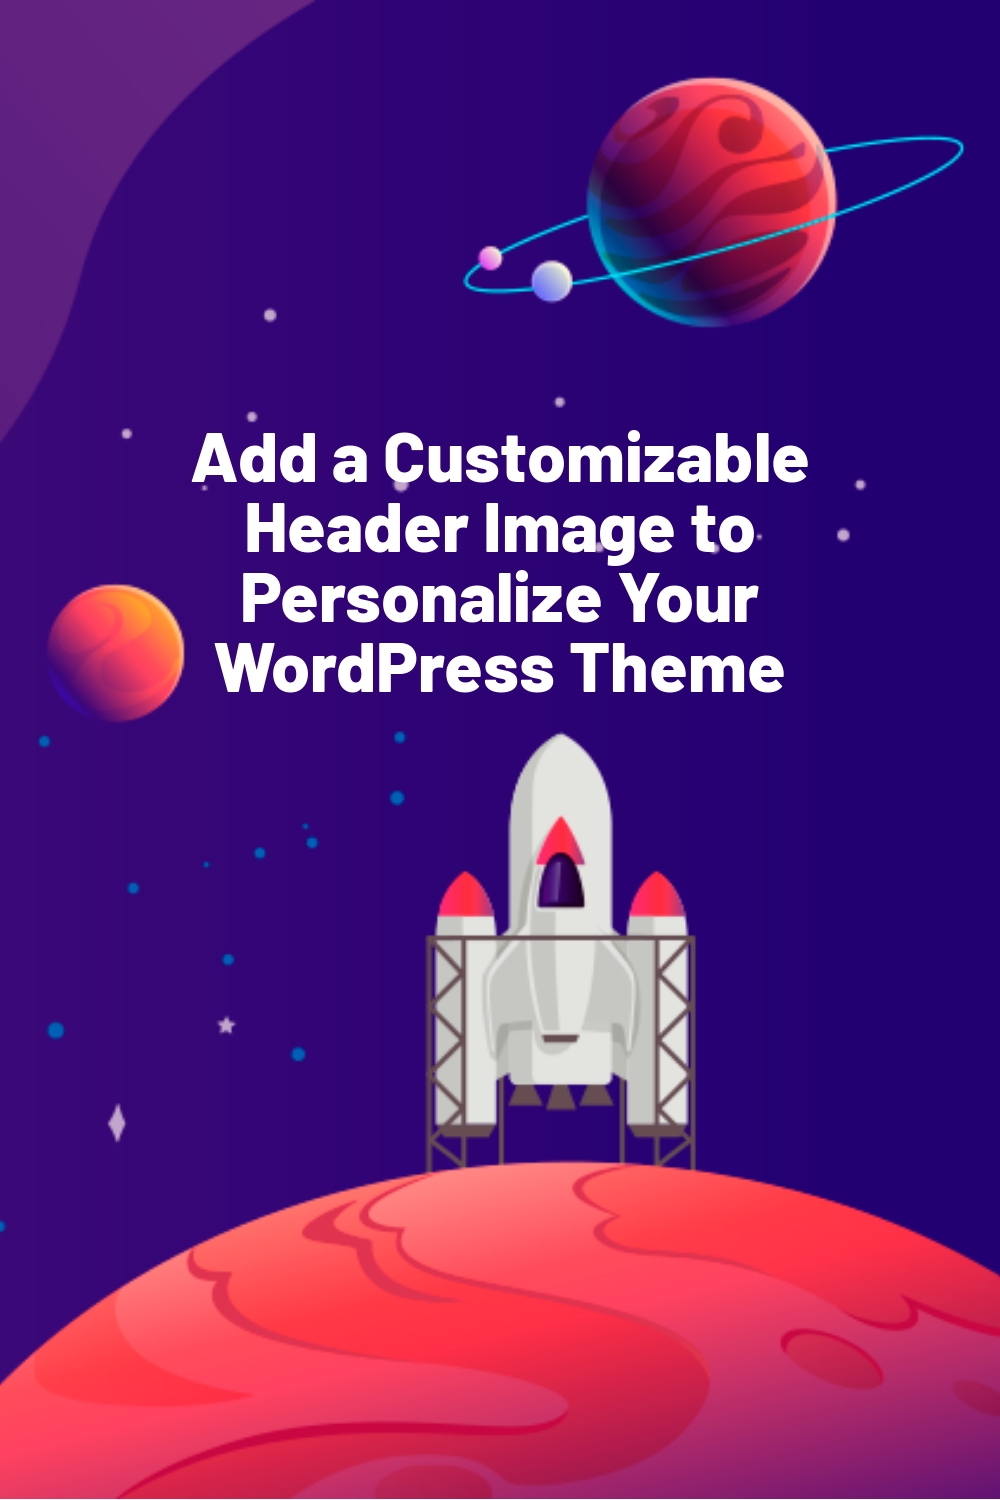 Add a Customizable Header Image to Personalize Your WordPress Theme